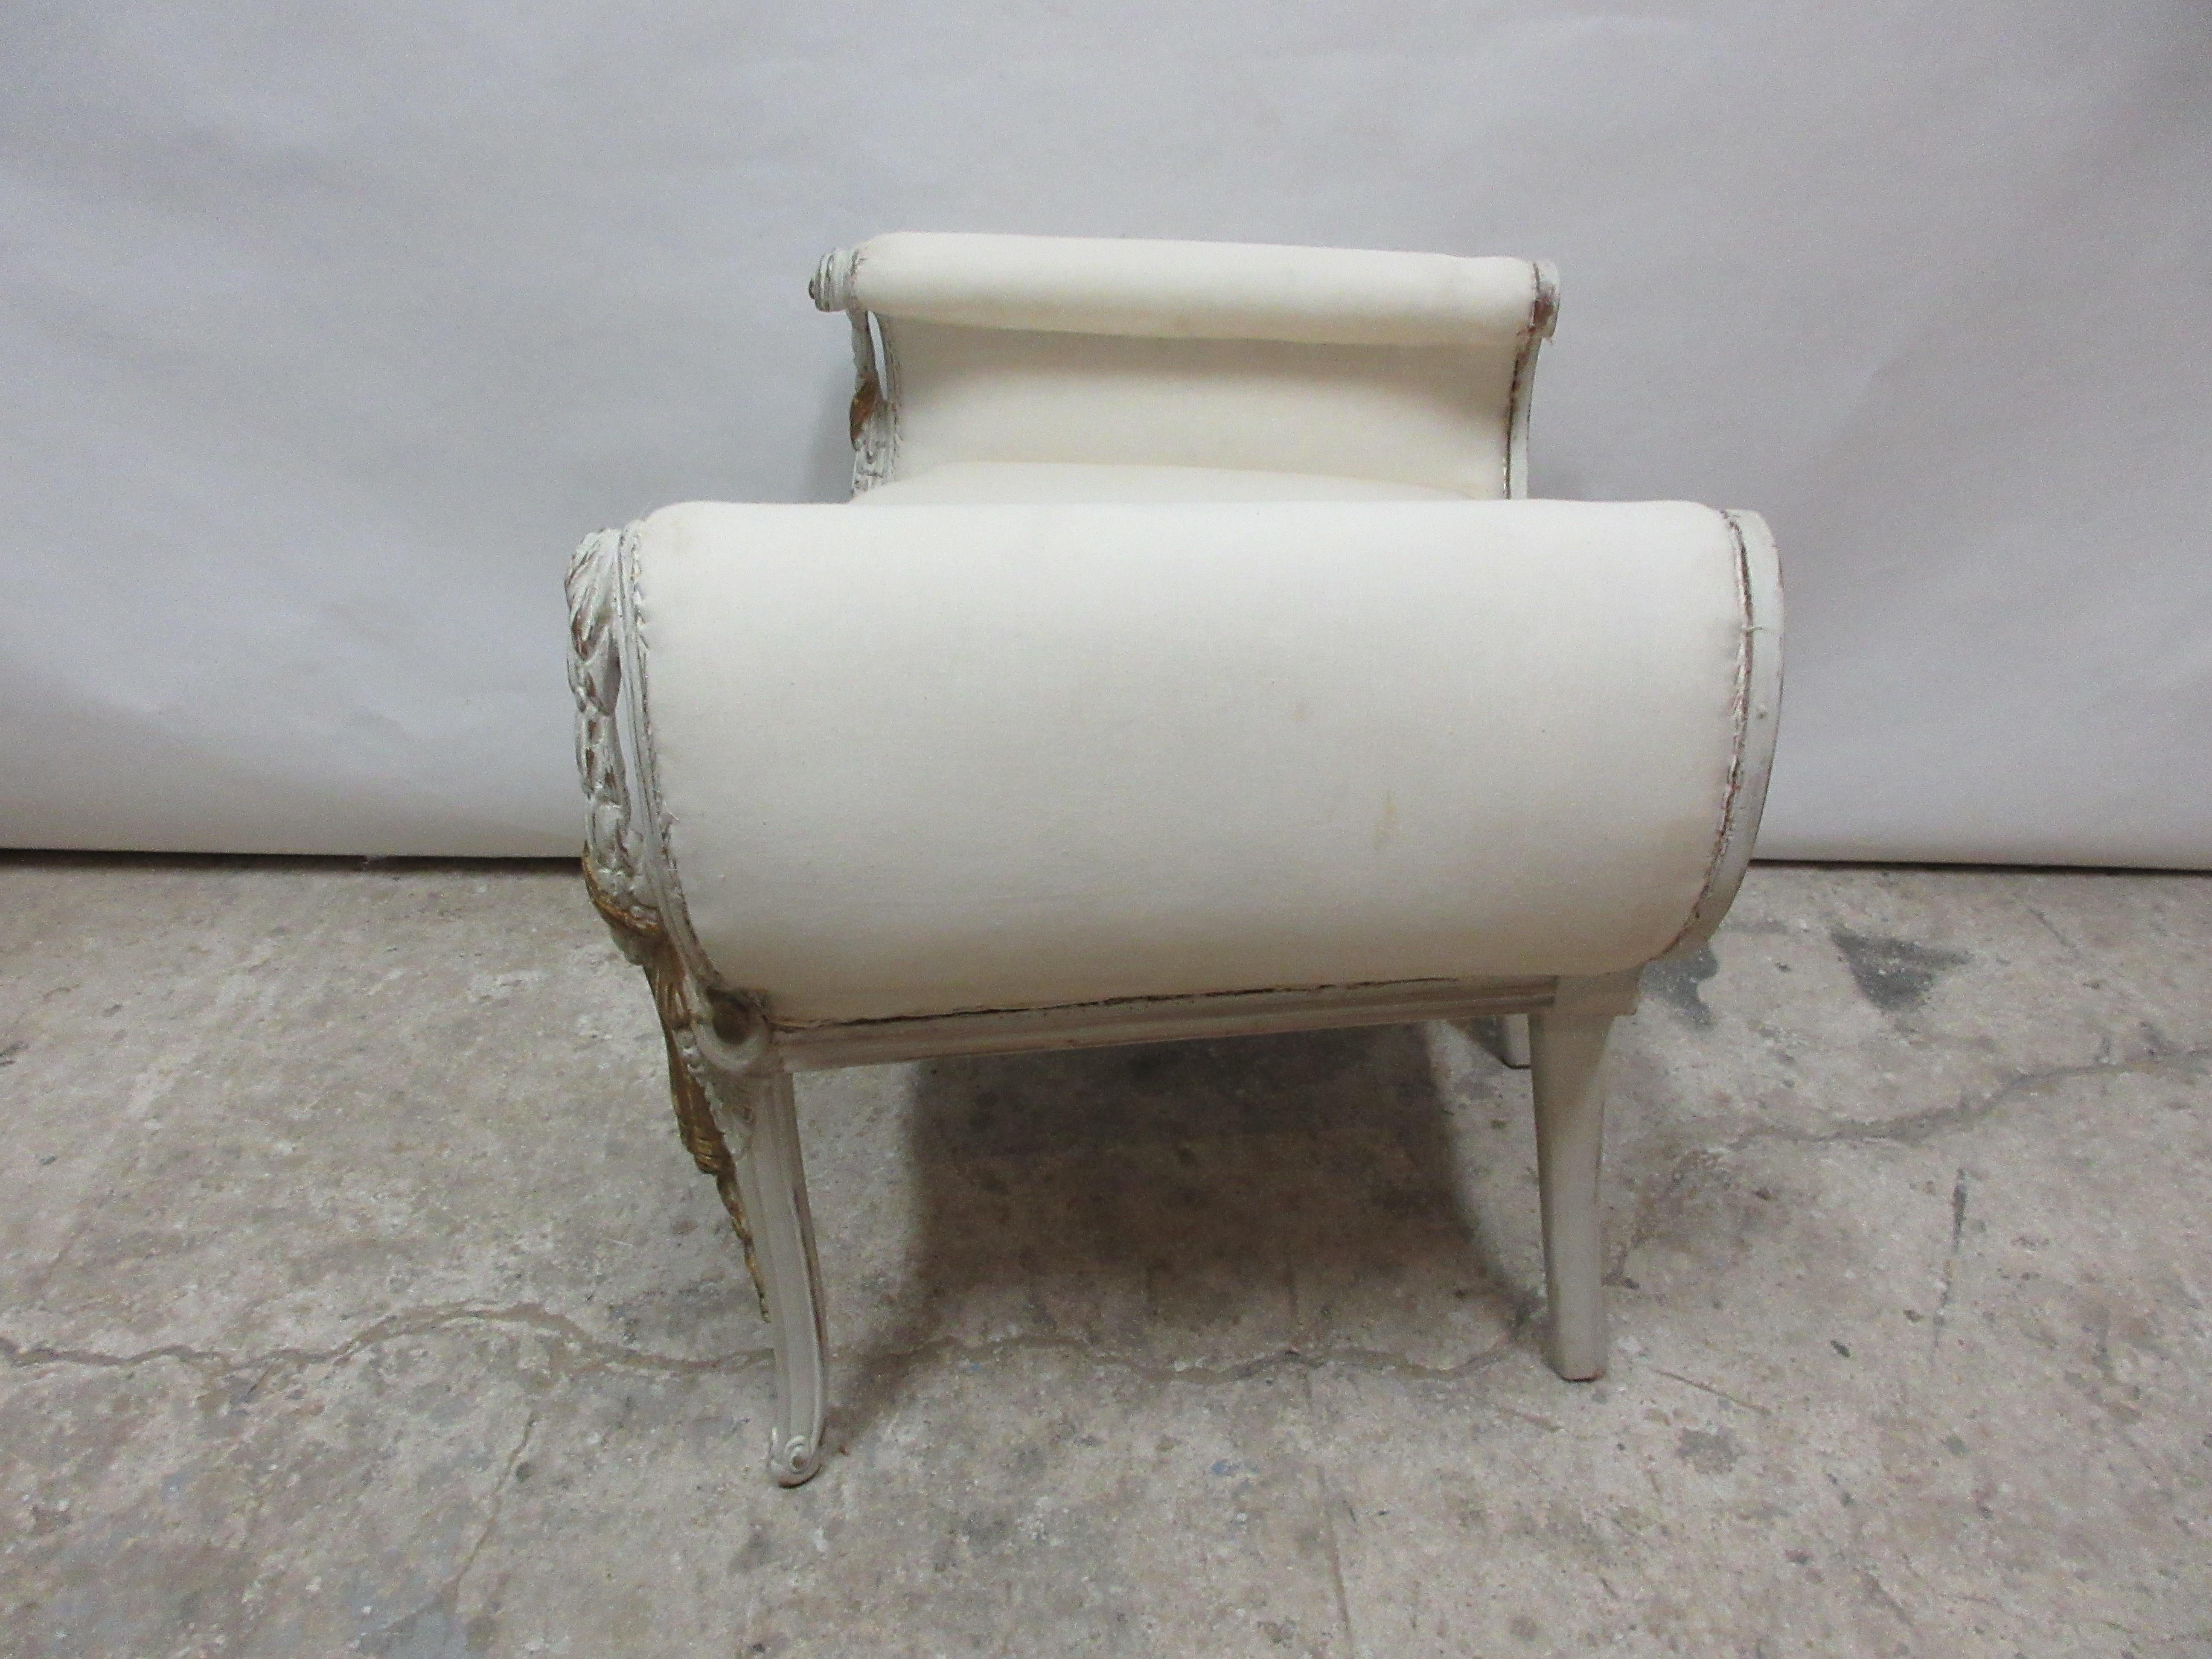 This is an original paint Royal Gustavian vanity stool, the seating is new and covered in Muslin.